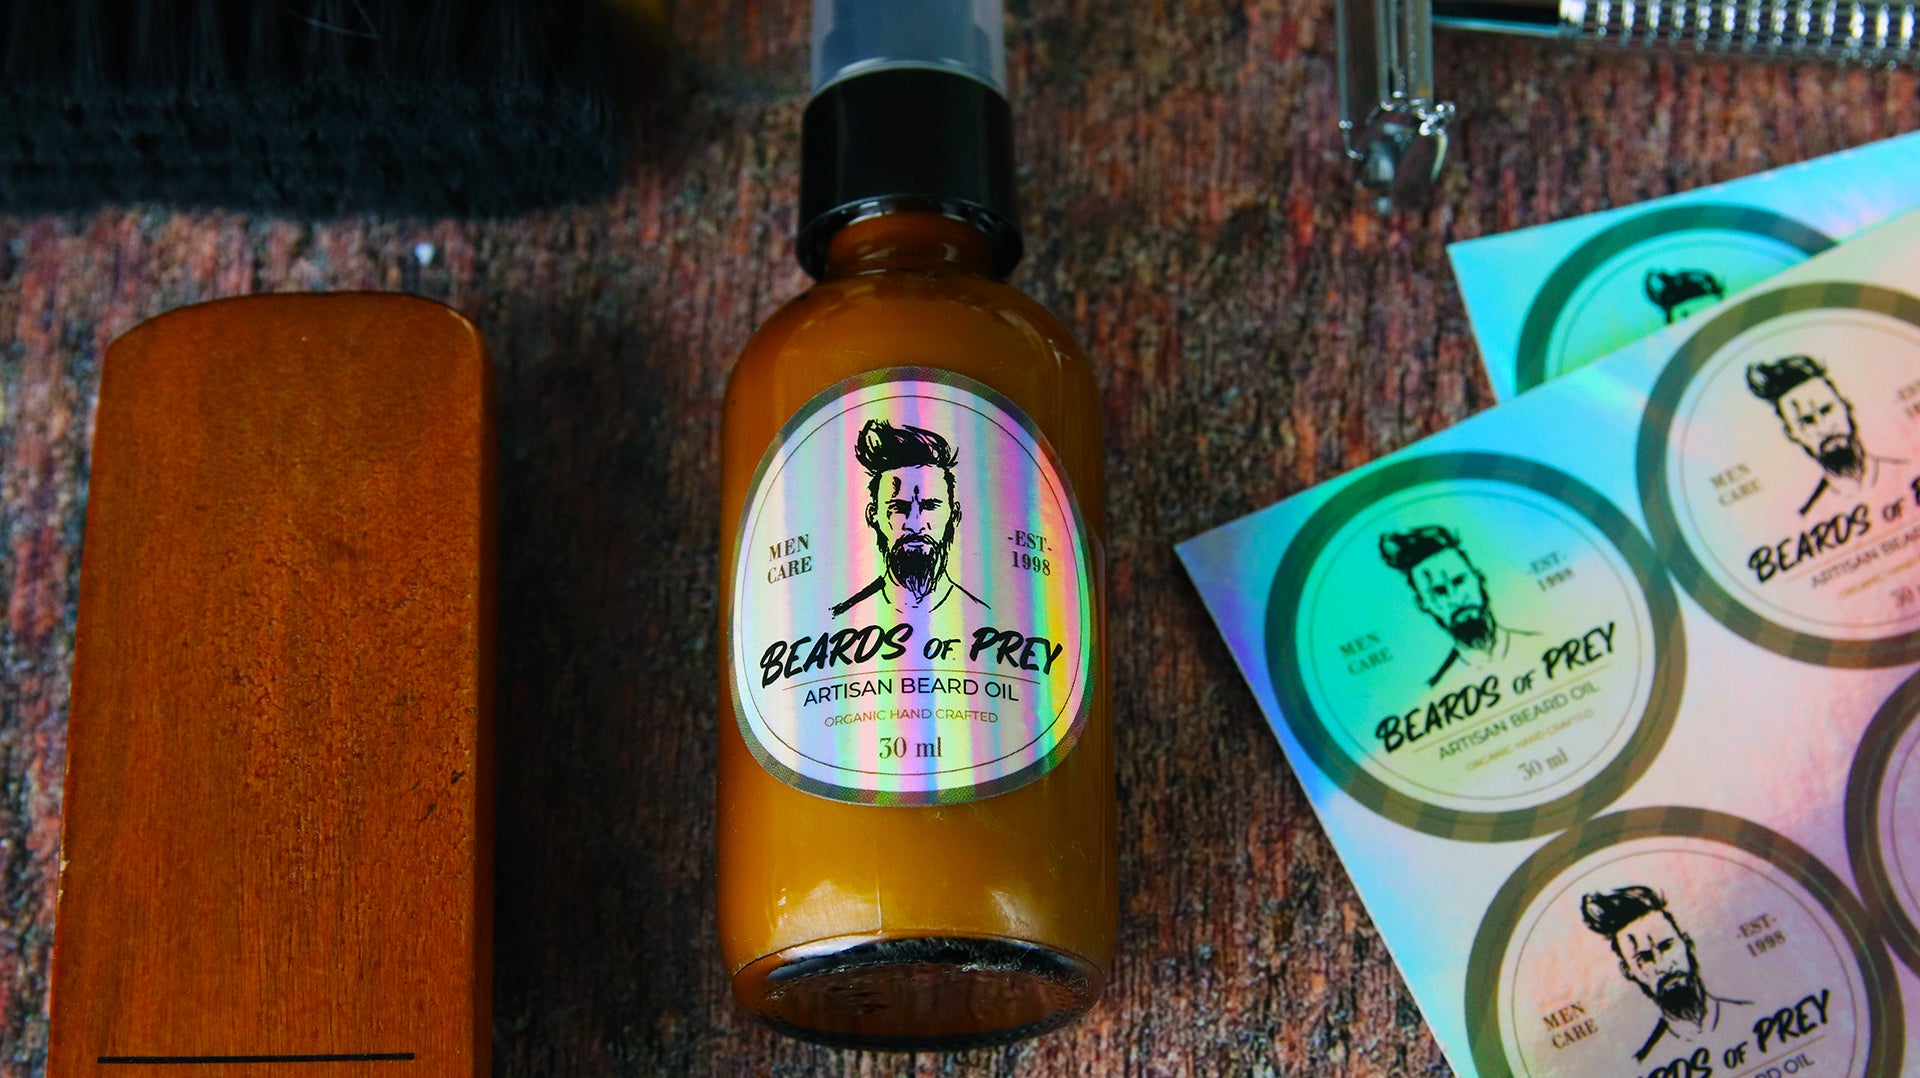 Recyclable labels applied to an amber jar with beard oil